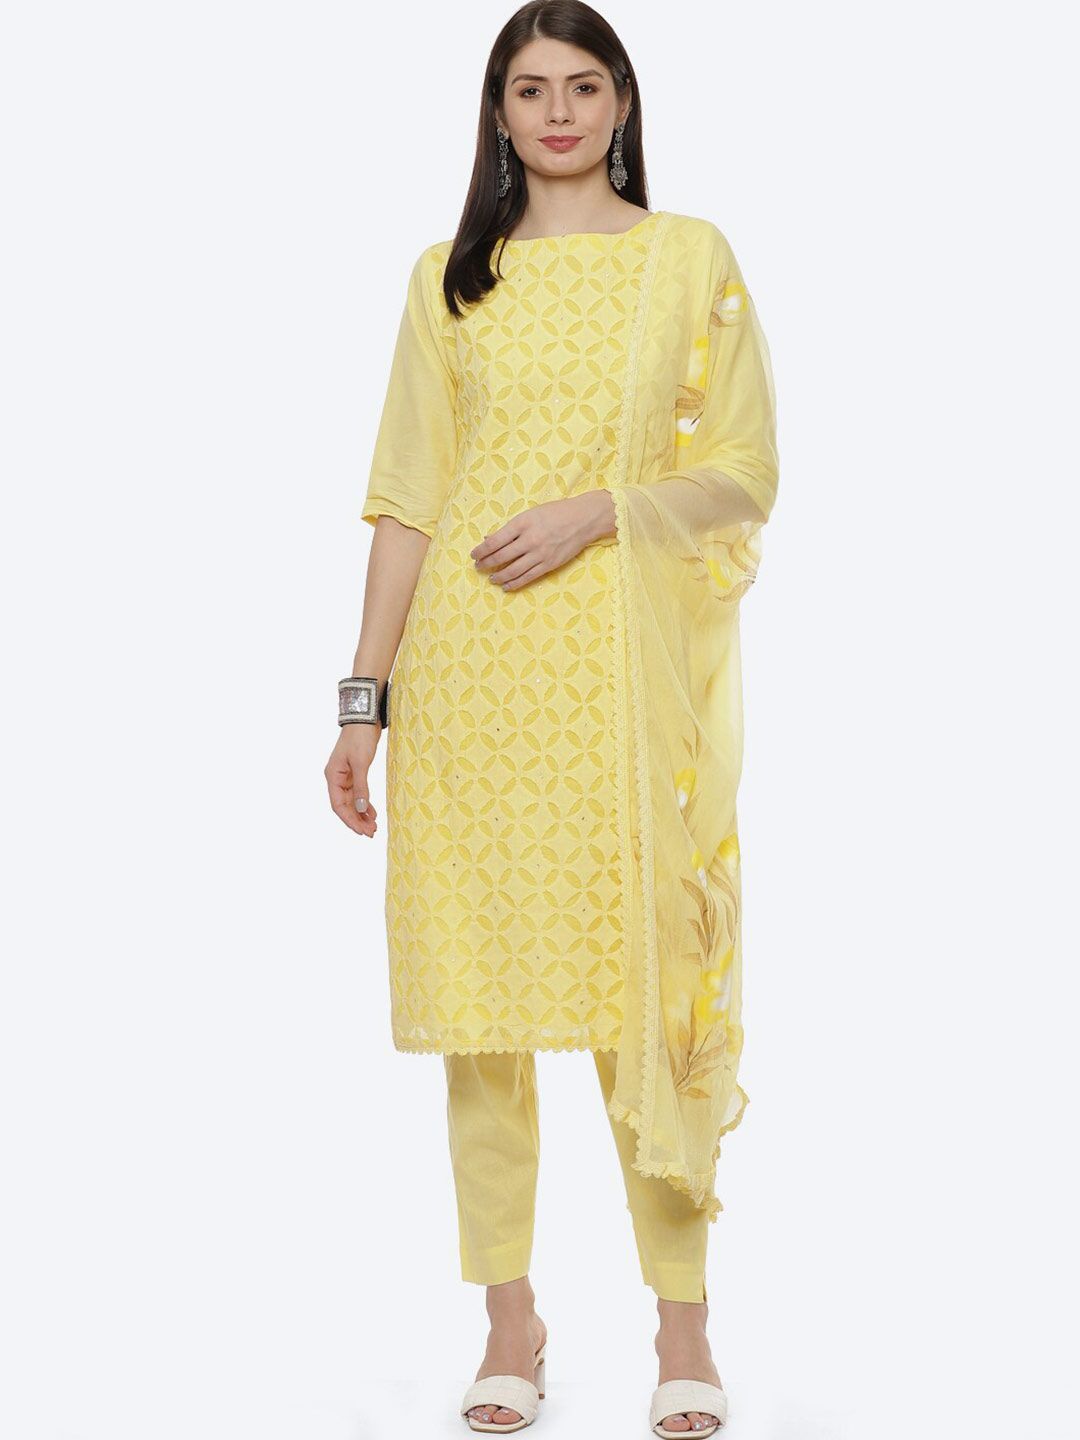 Biba Yellow & Grey Unstitched Dress Material Price in India